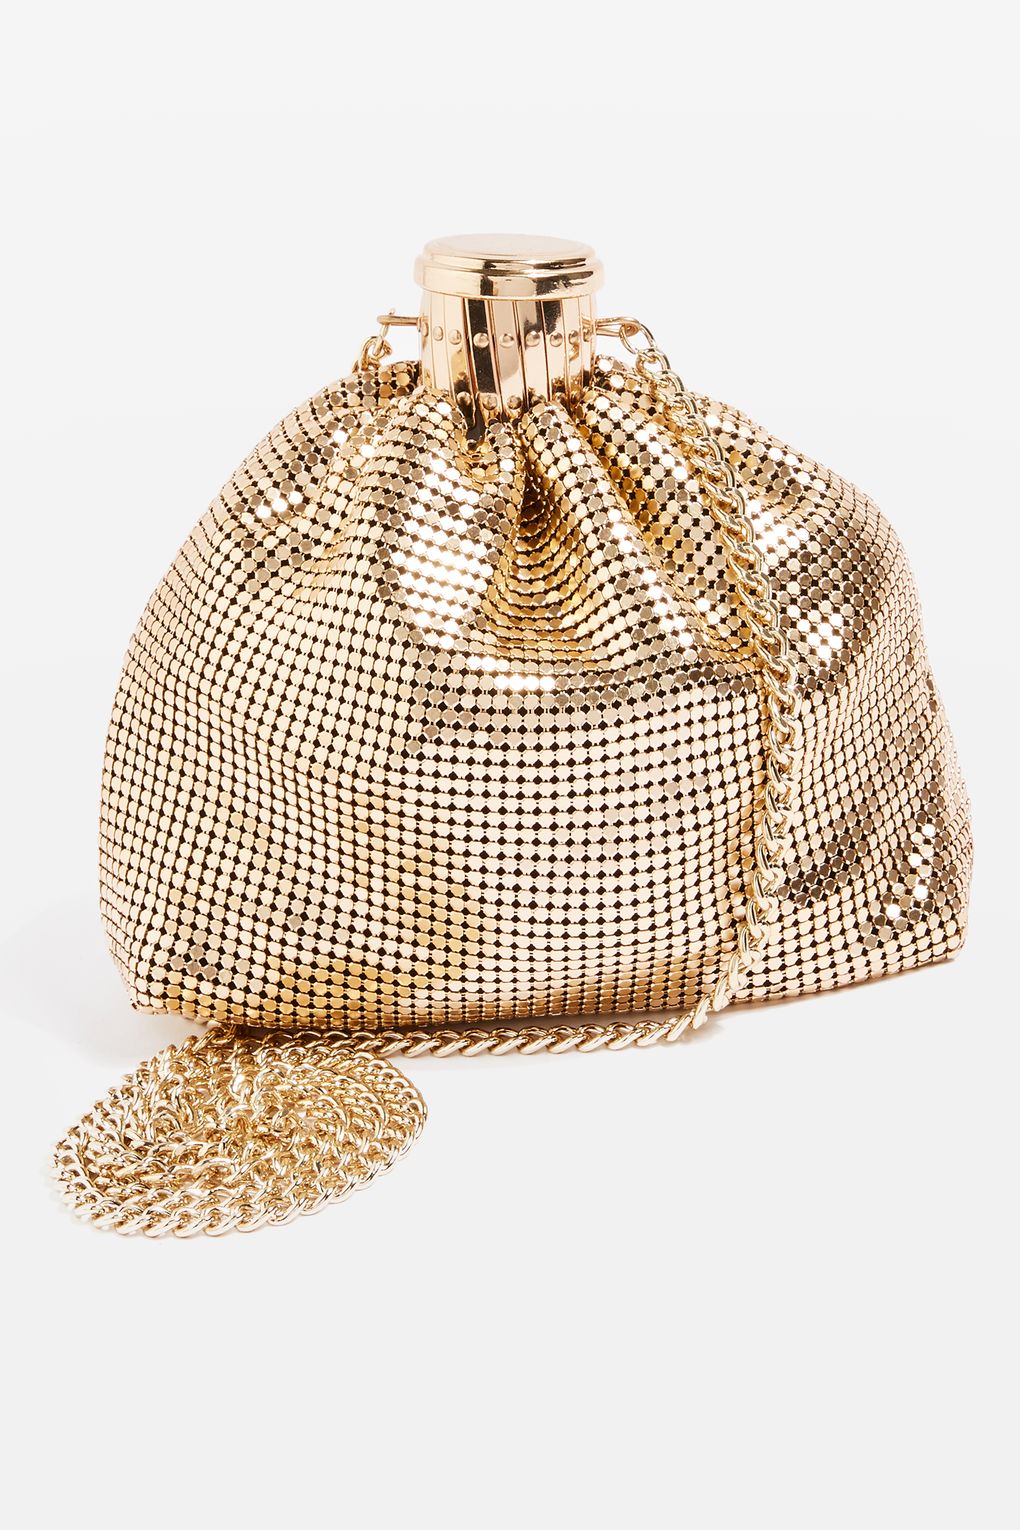 the-seasons-best-party-bags-topshop